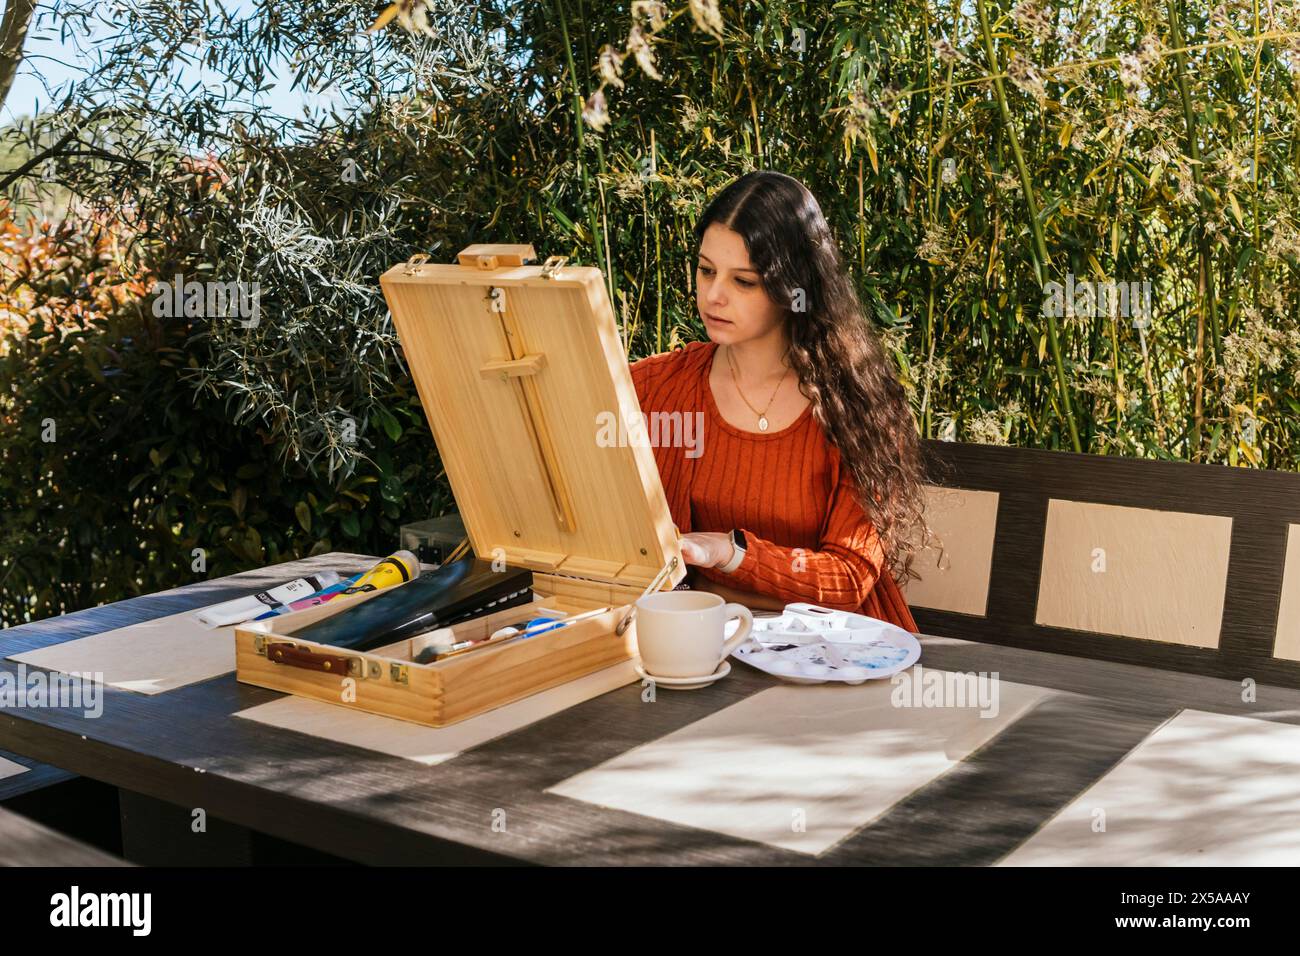 A focused female artist sets up her wooden easel and painting supplies on a sunny patio, surrounded by greenery, ready to start her creative process Stock Photo